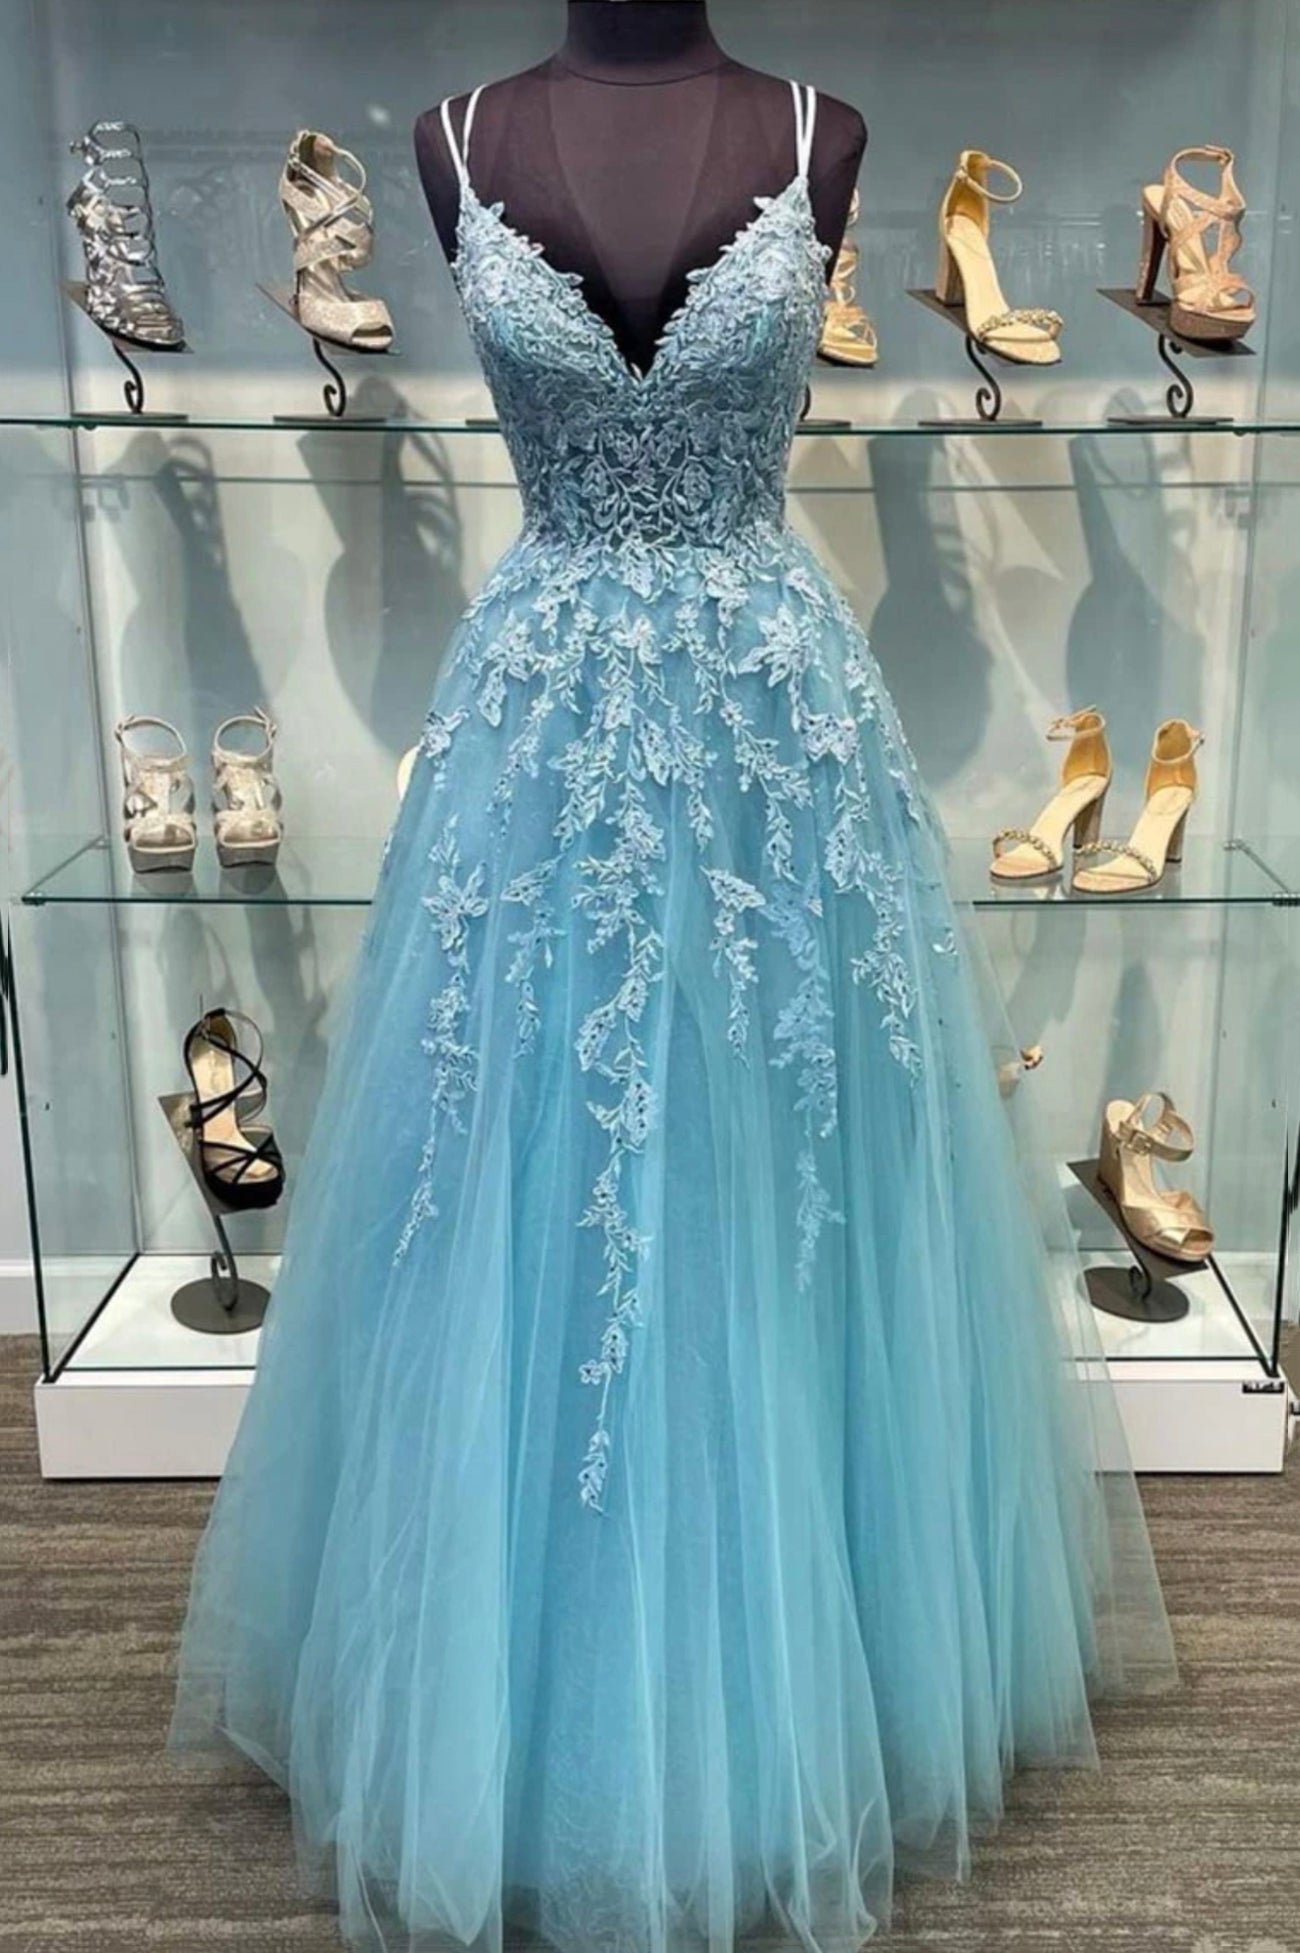 Cute Summer Dress, Blue V-Neck Tulle Long Prom Dresses, A-Line Evening Dresses with Lace